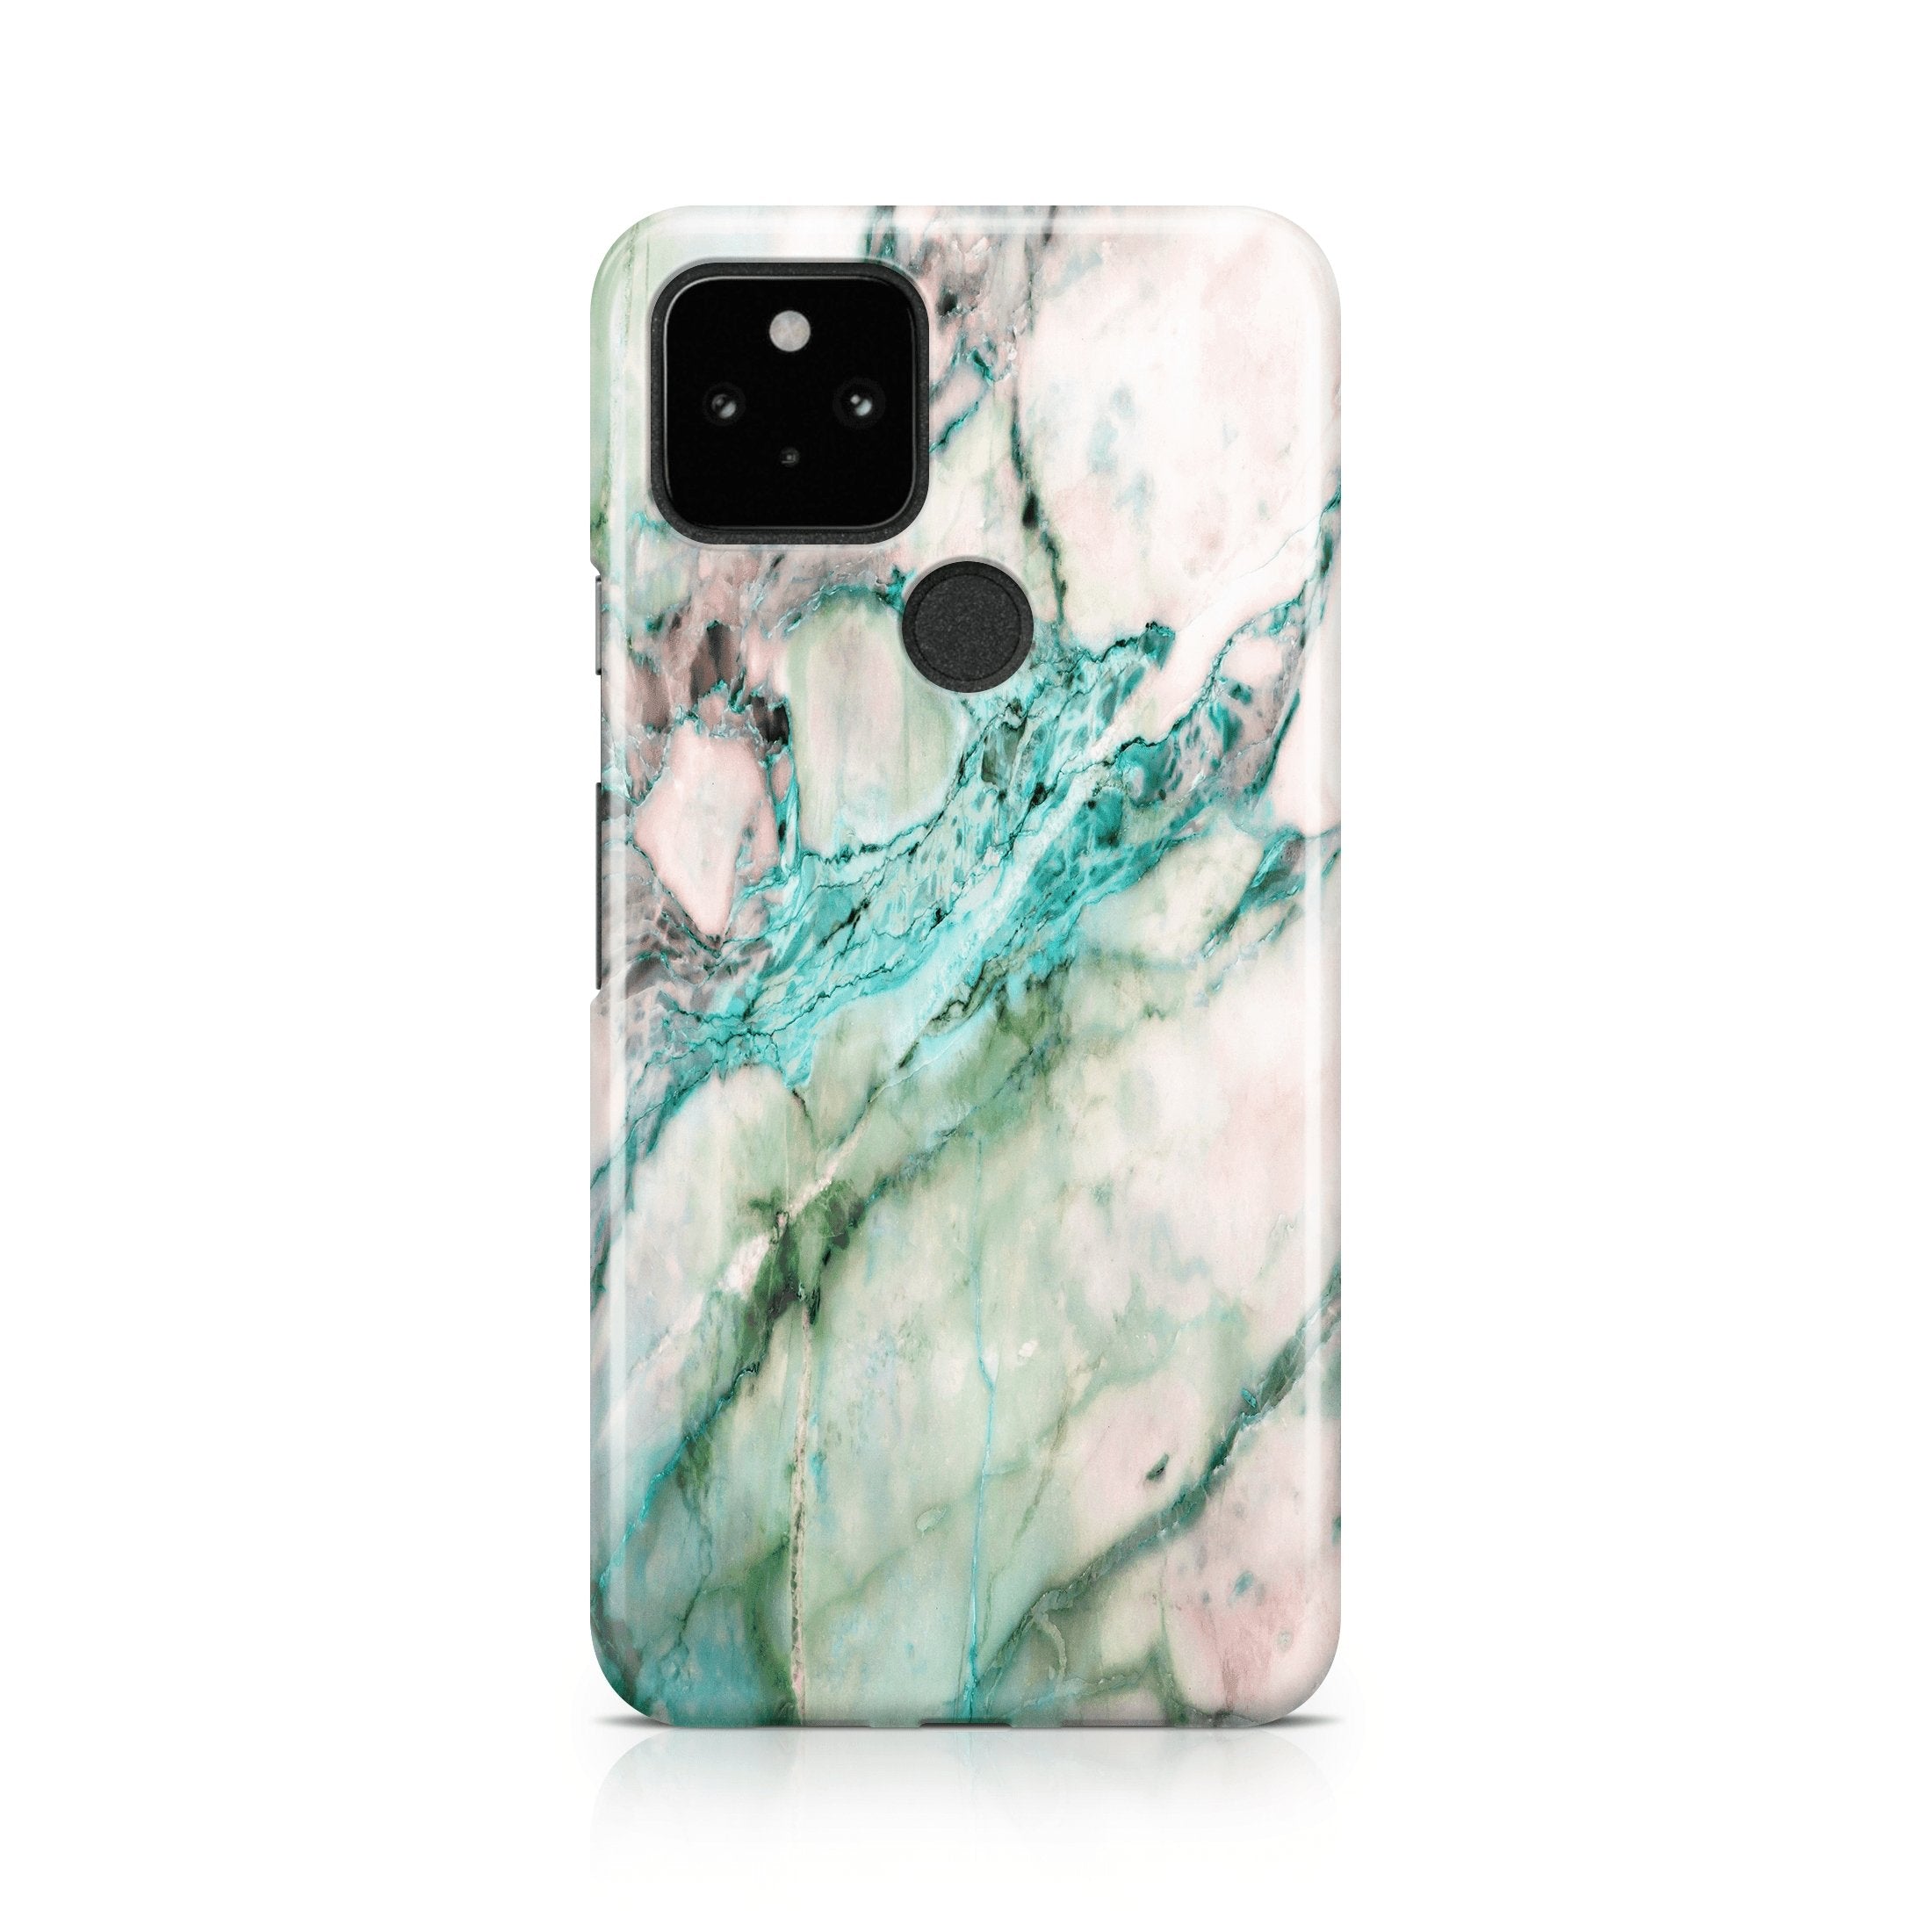 Turquoise Marble - Google phone case designs by CaseSwagger